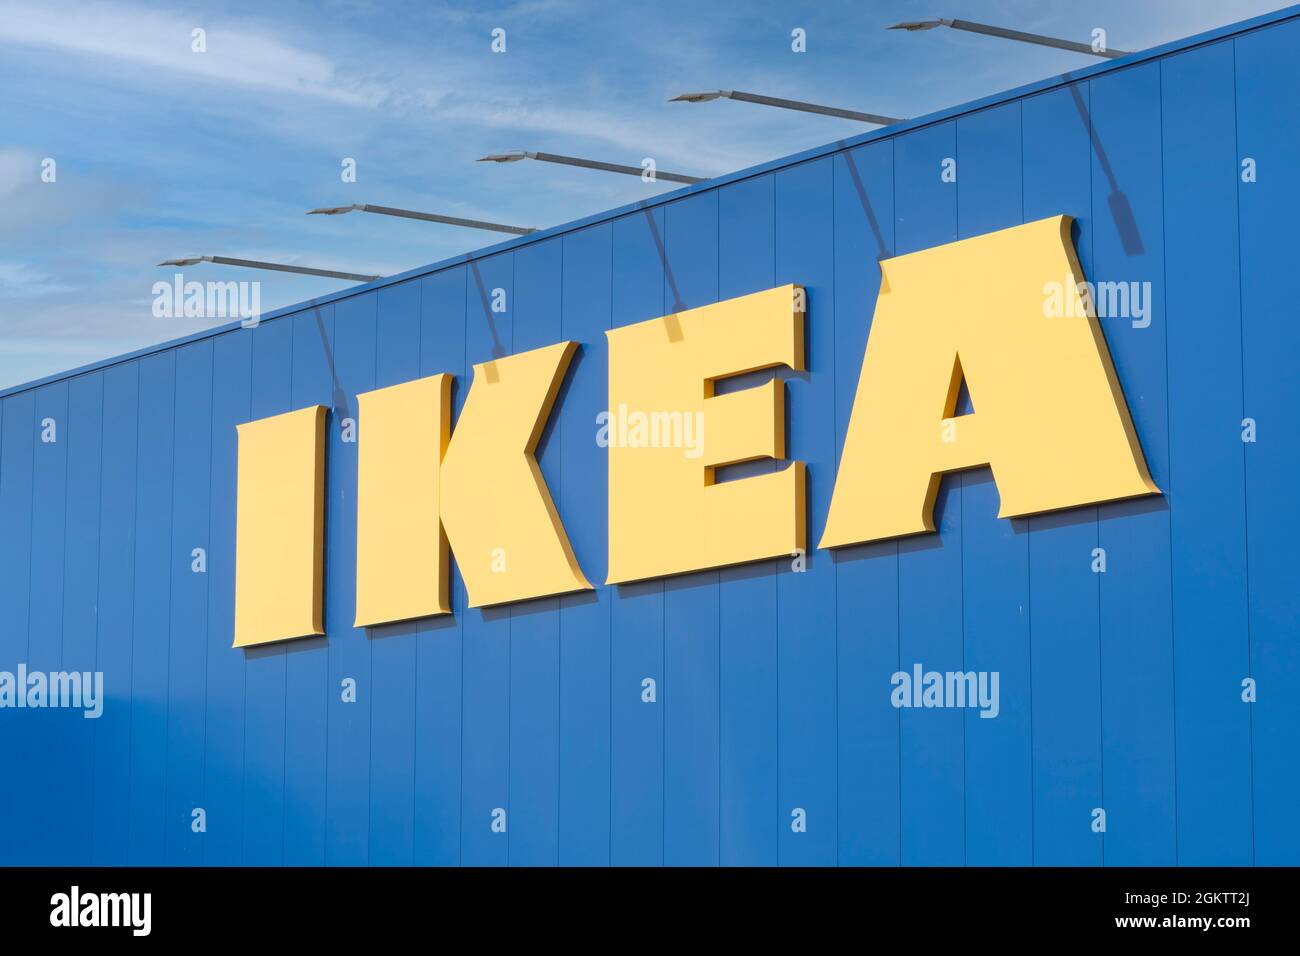 Ikea Italy High Resolution Stock Photography and Images - Alamy